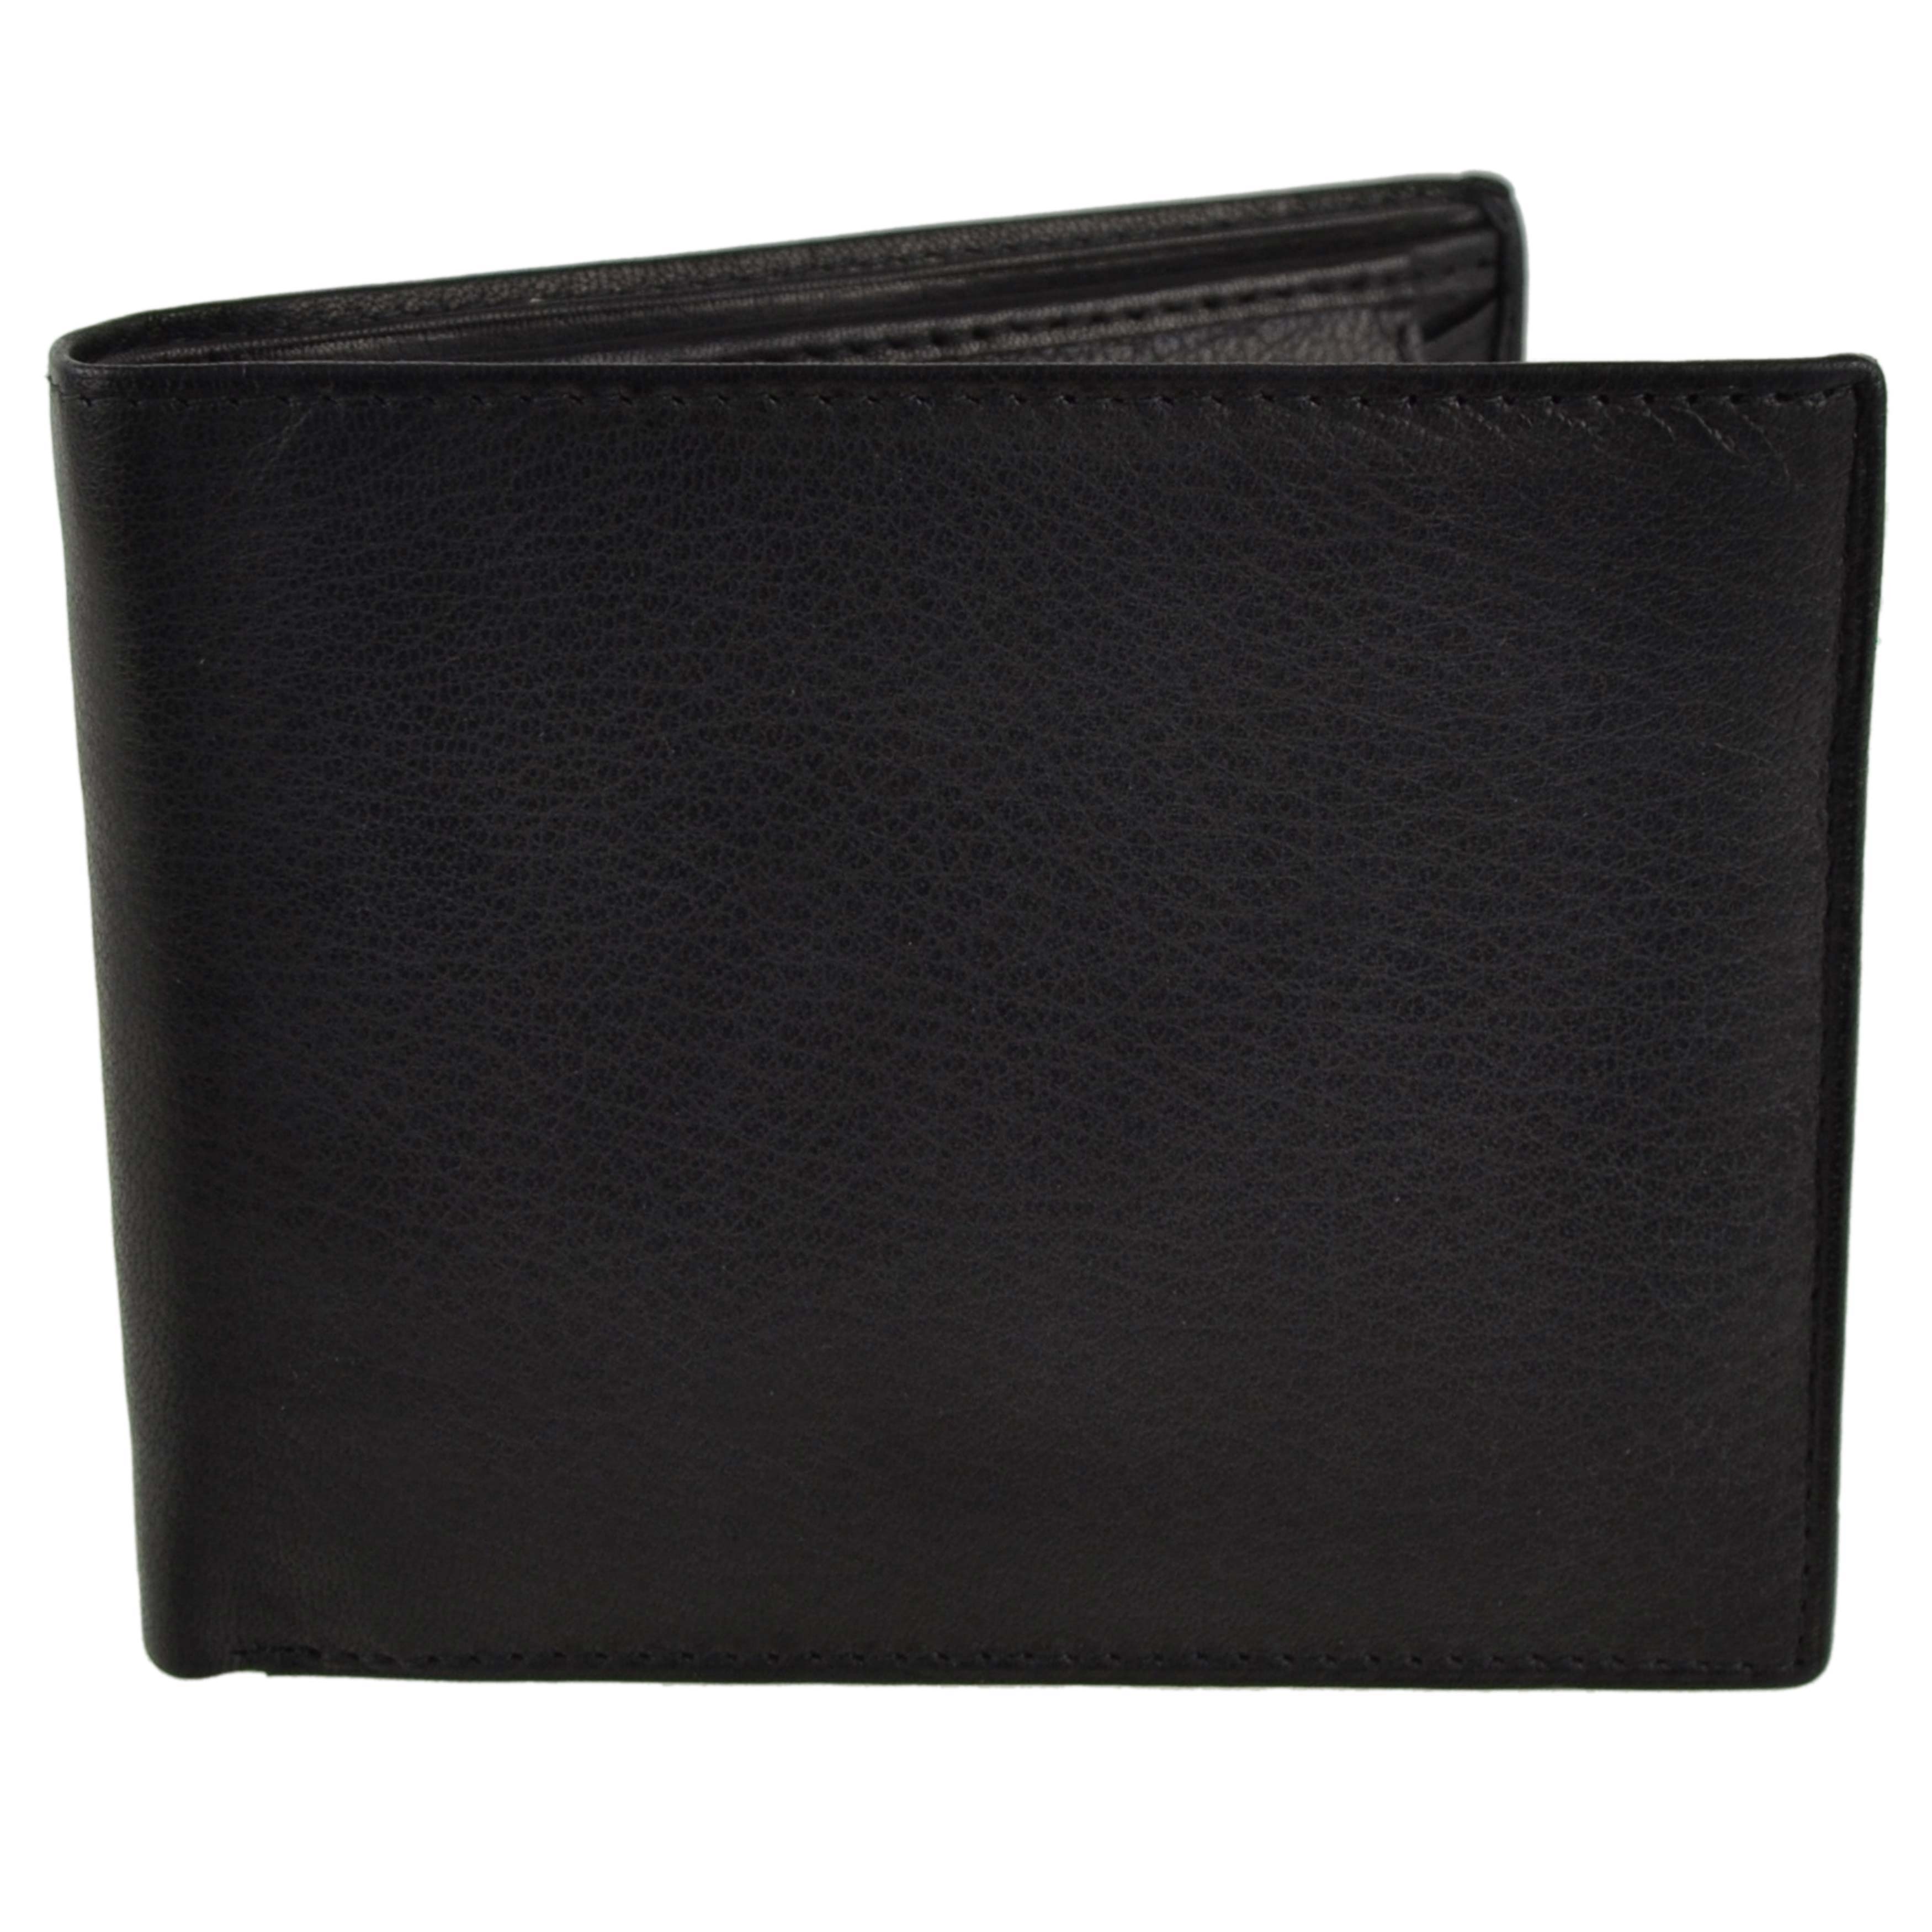 Mens/Gents Classic Leather Bi-Fold Wallet Top Quality Black Coin Pocket | eBay